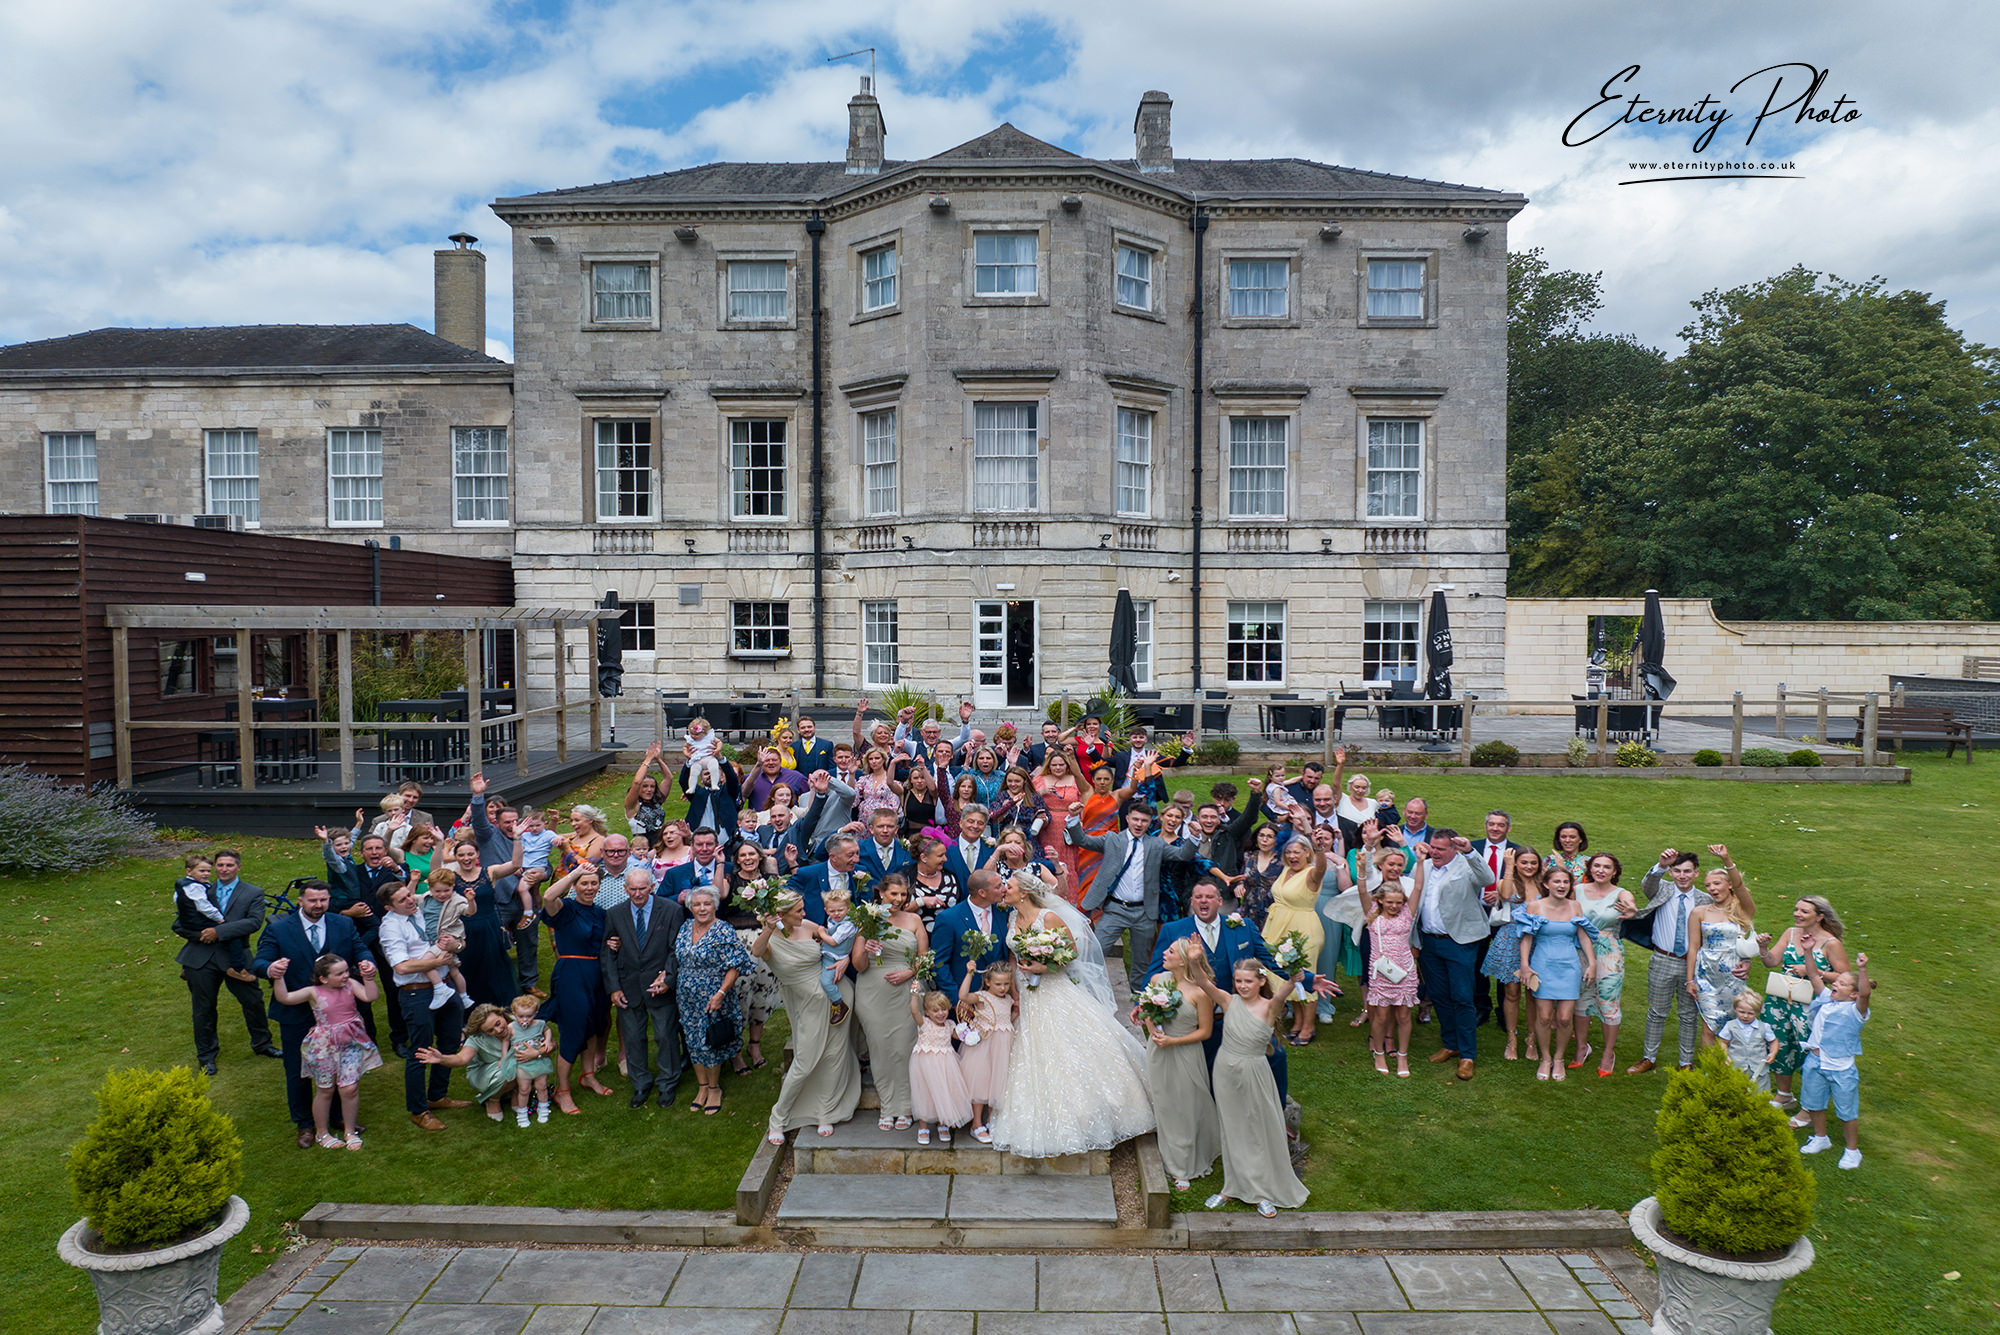 Wedding guests celebrating outside historic manor in UK.